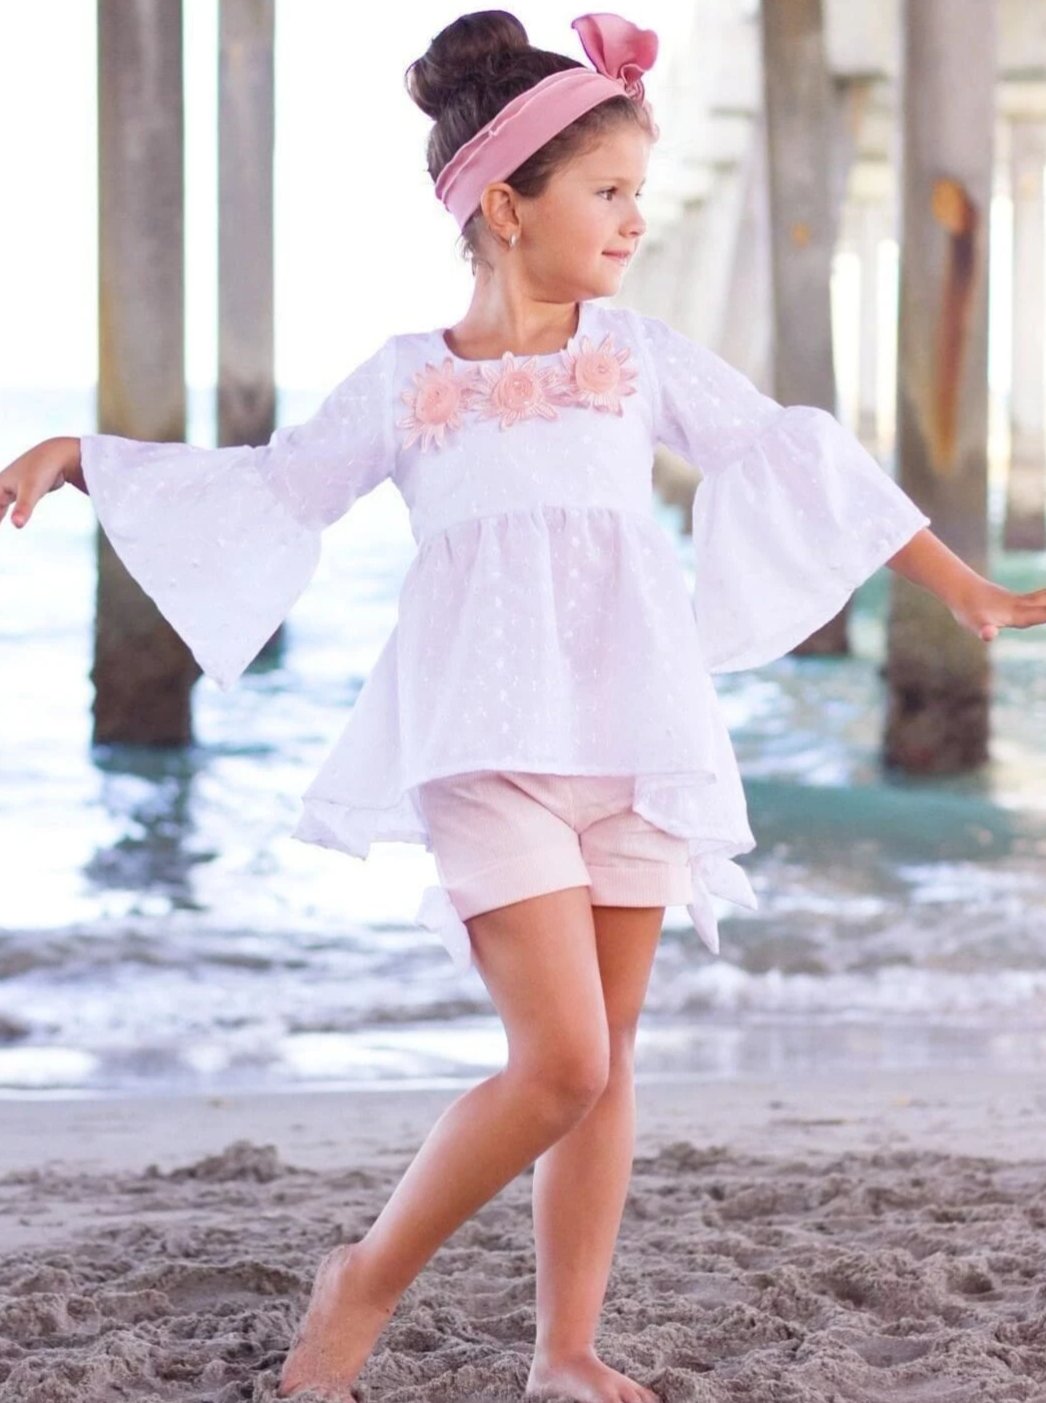 Girls Trimmed Boho Flared Sleeve Tunic & Cuffed Bow Shorts Set - White / 2T/3T - Girls Spring Casual Set